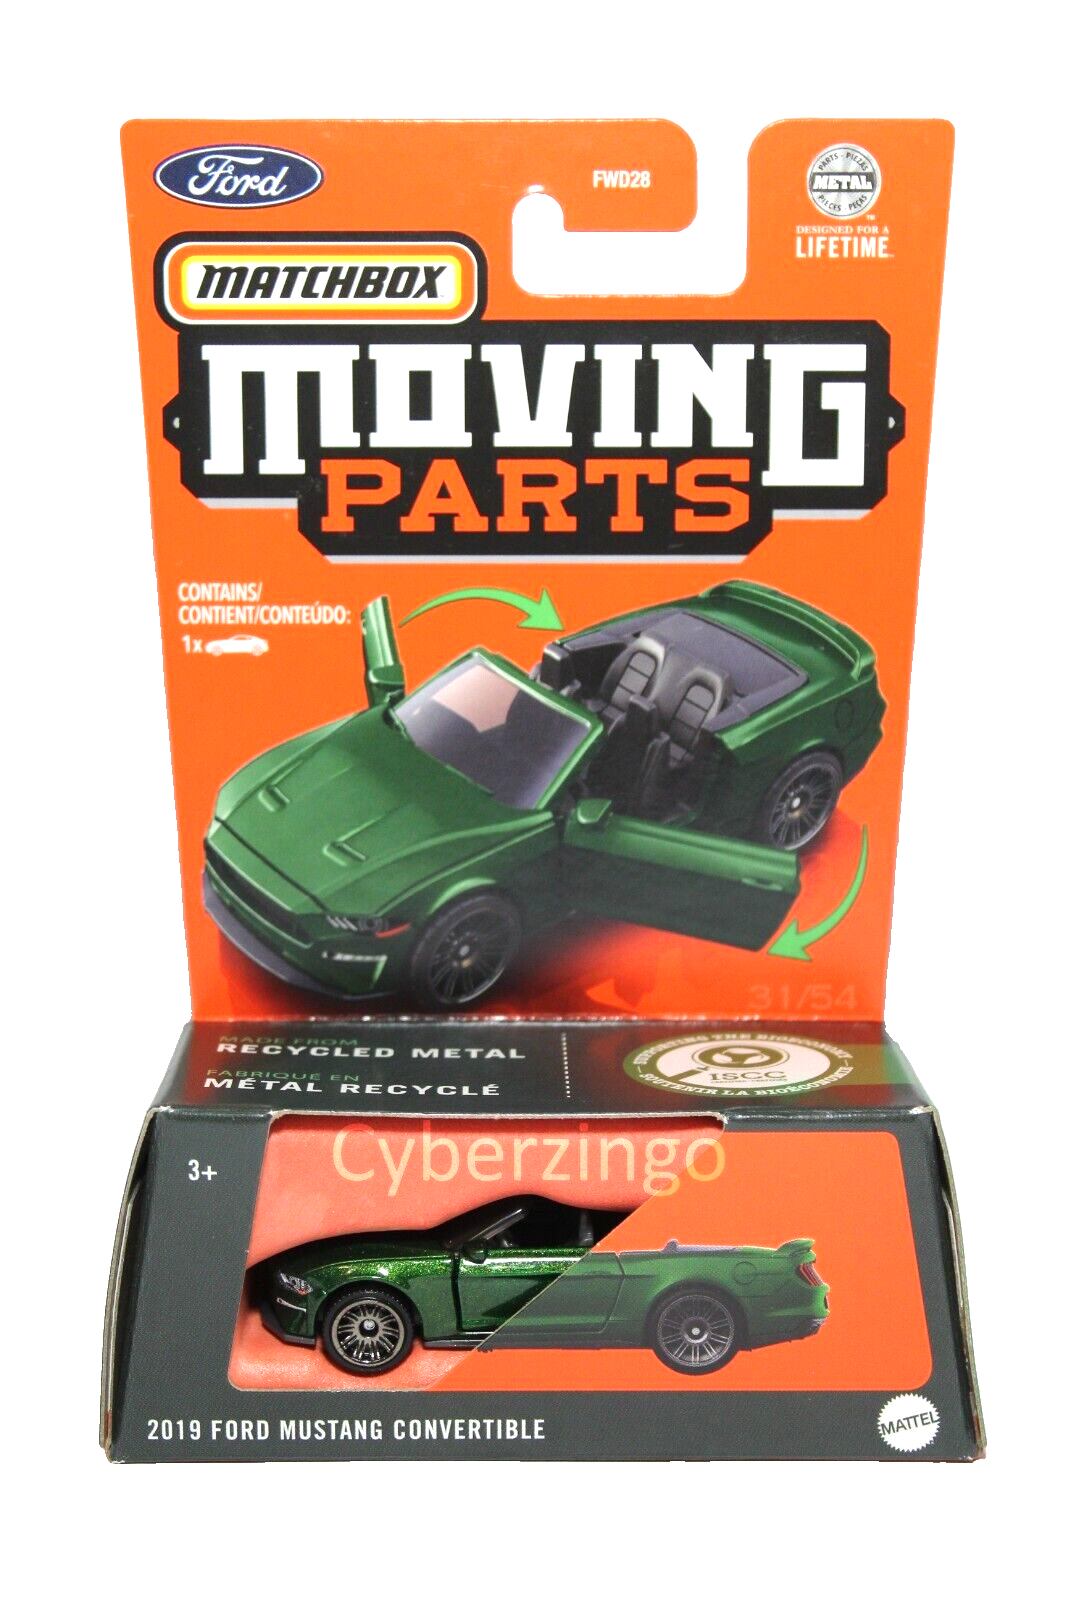 1:64 Matchbox Moving Parts 2019 Ford Mustang Convertible Diecast Car BRAND NEW - $8.98